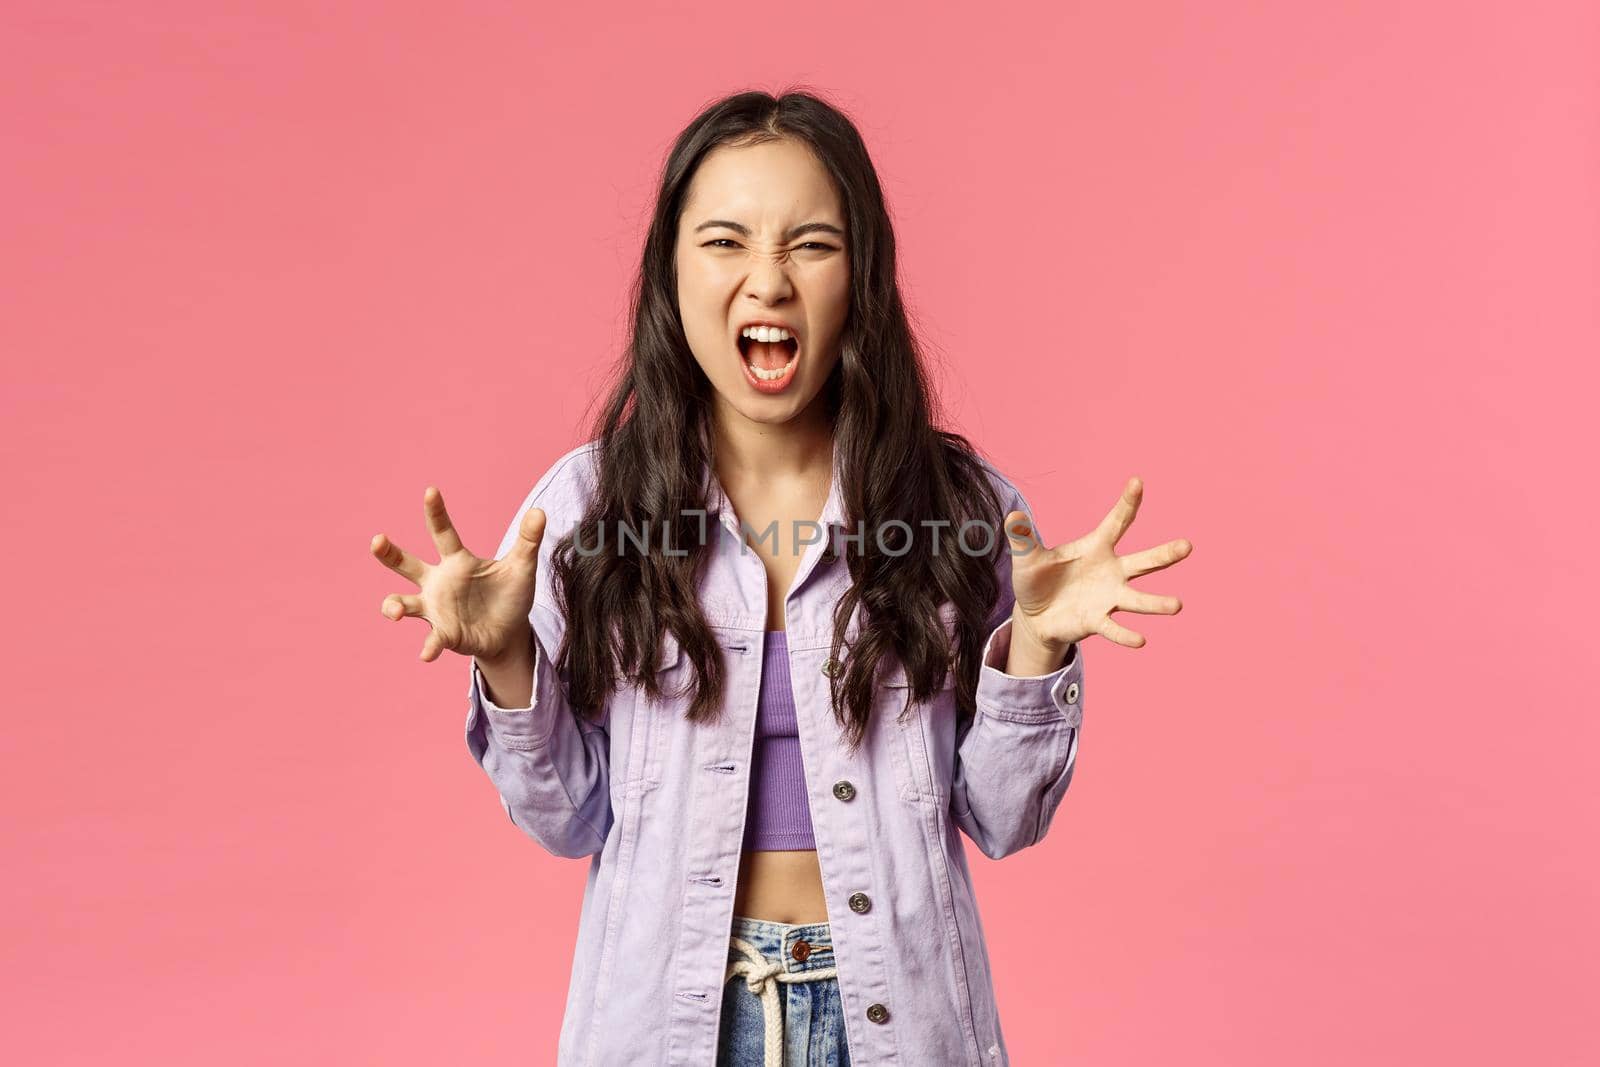 Portrait of aggressive young bothered girl losing temper, screaming furious and angry grimacing, yelling at person with hate and aggression, squeeze hands into fists, pissed-off, pink background.